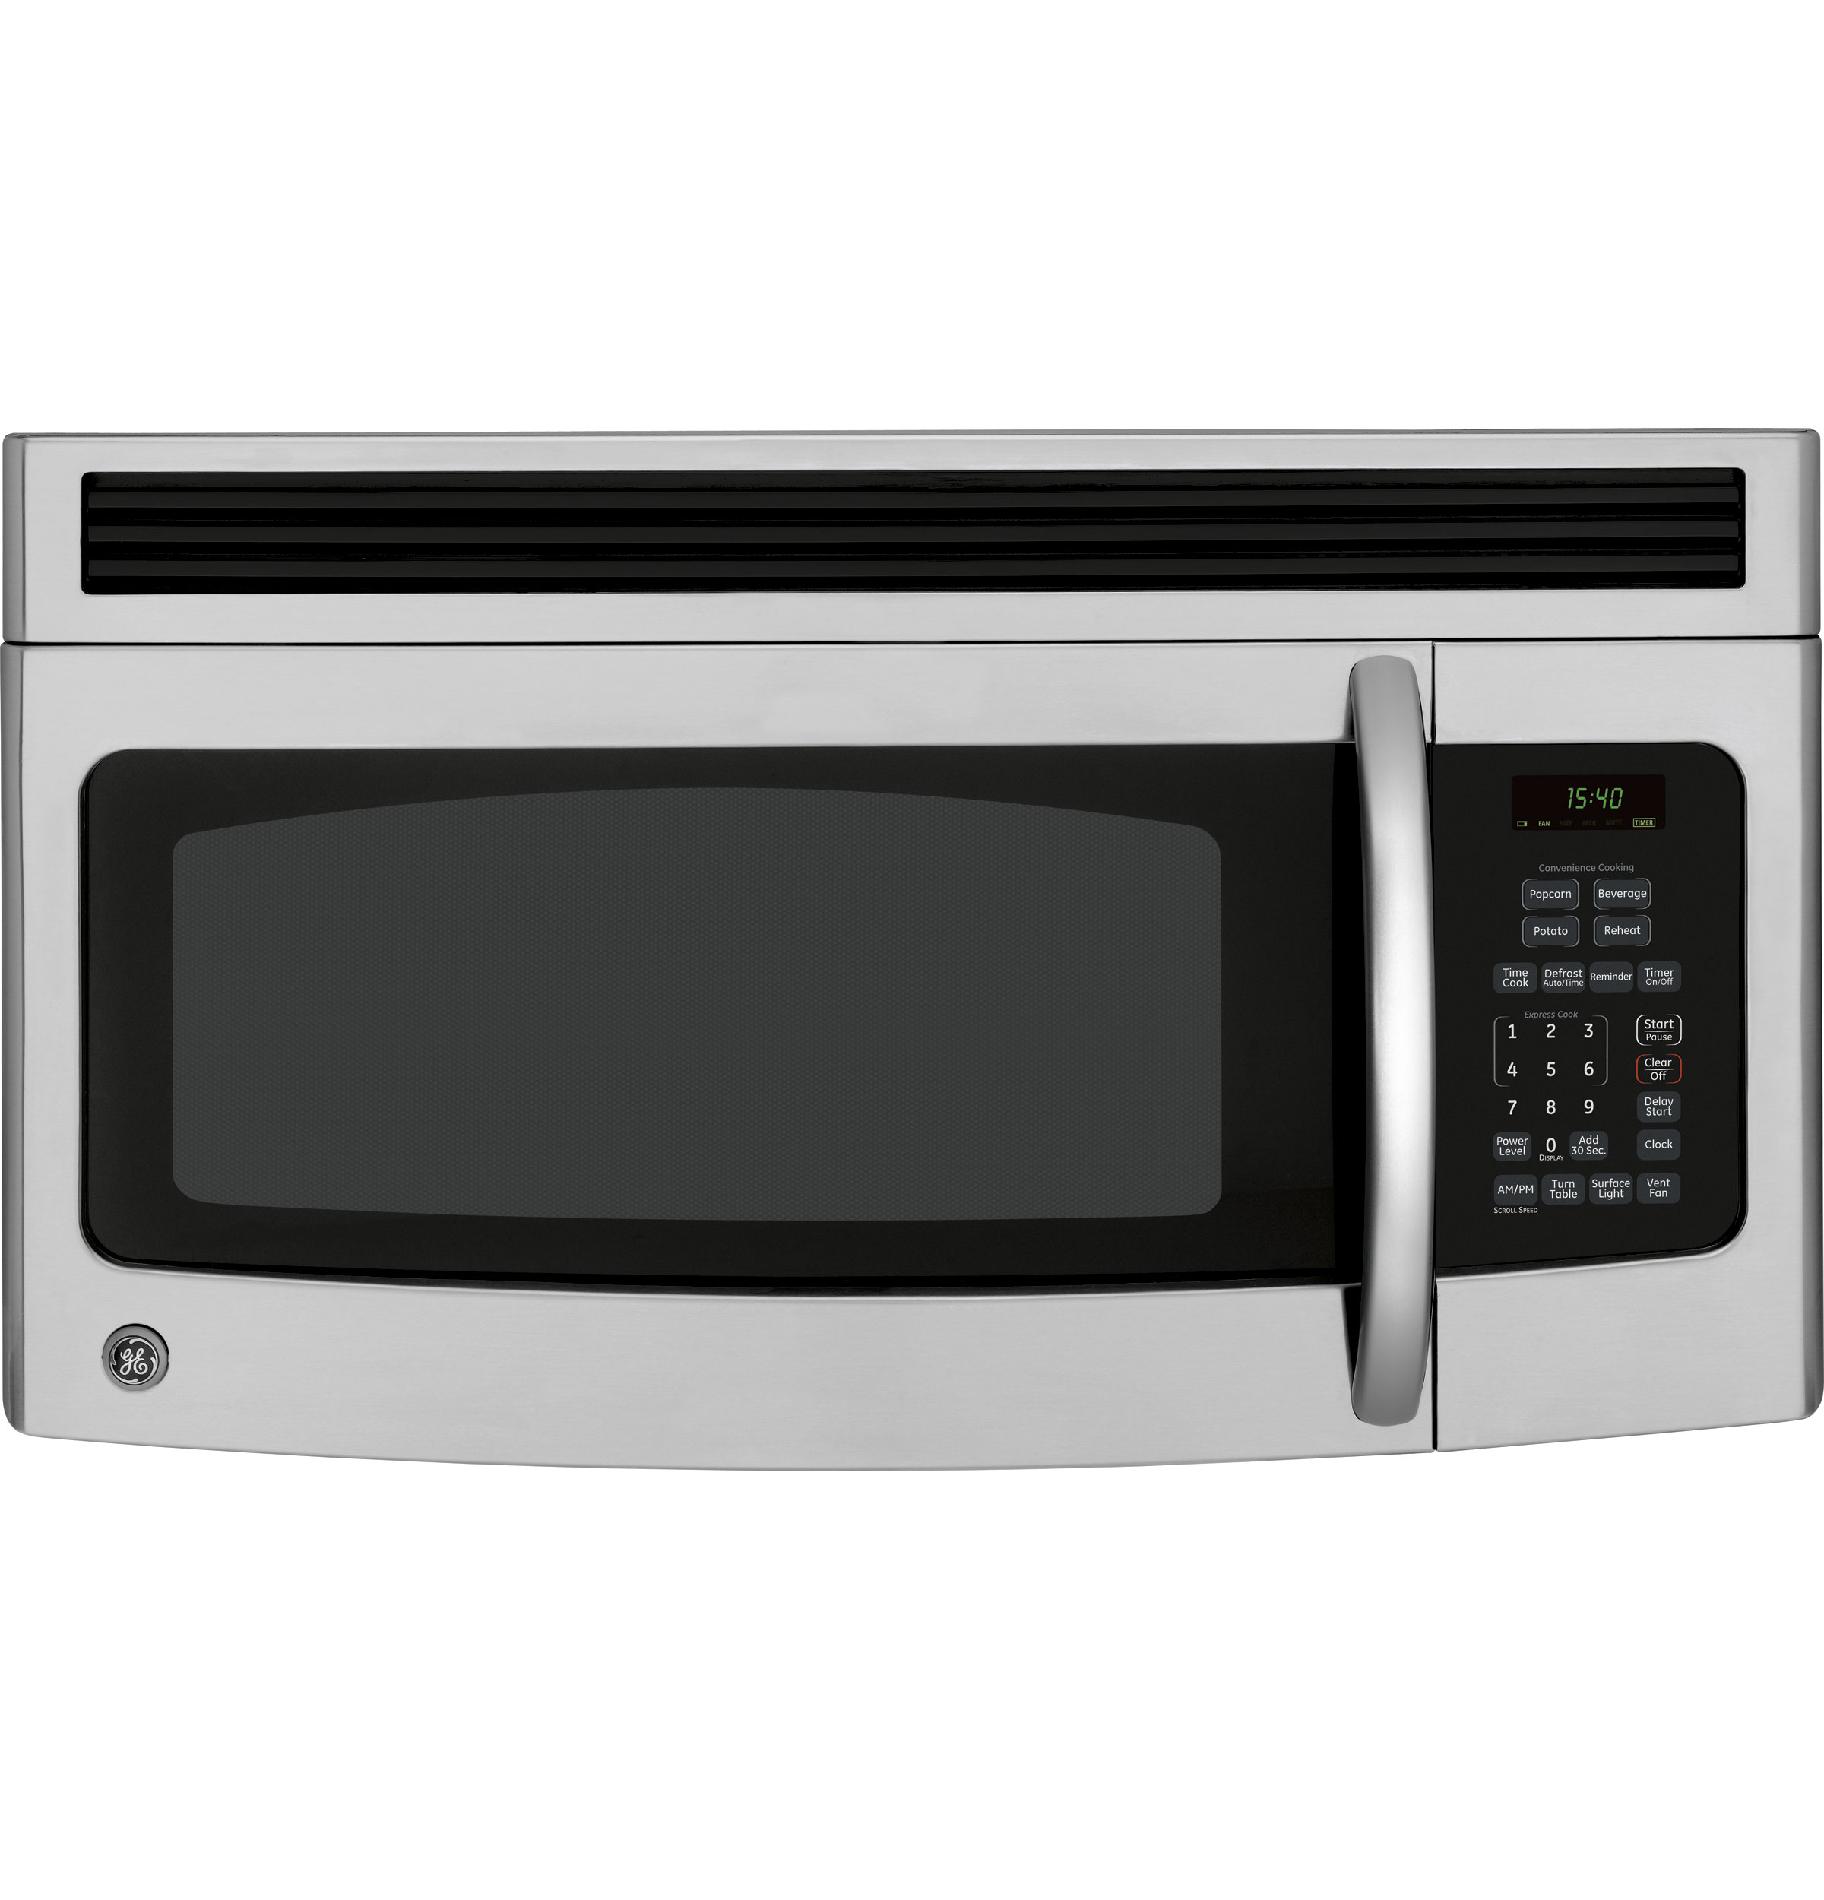 GE Appliances JVM1540SMSS 30" Over the Ran Microwave Oven - Stainless Steel Ge Spacemaker Microwave Stainless Steel